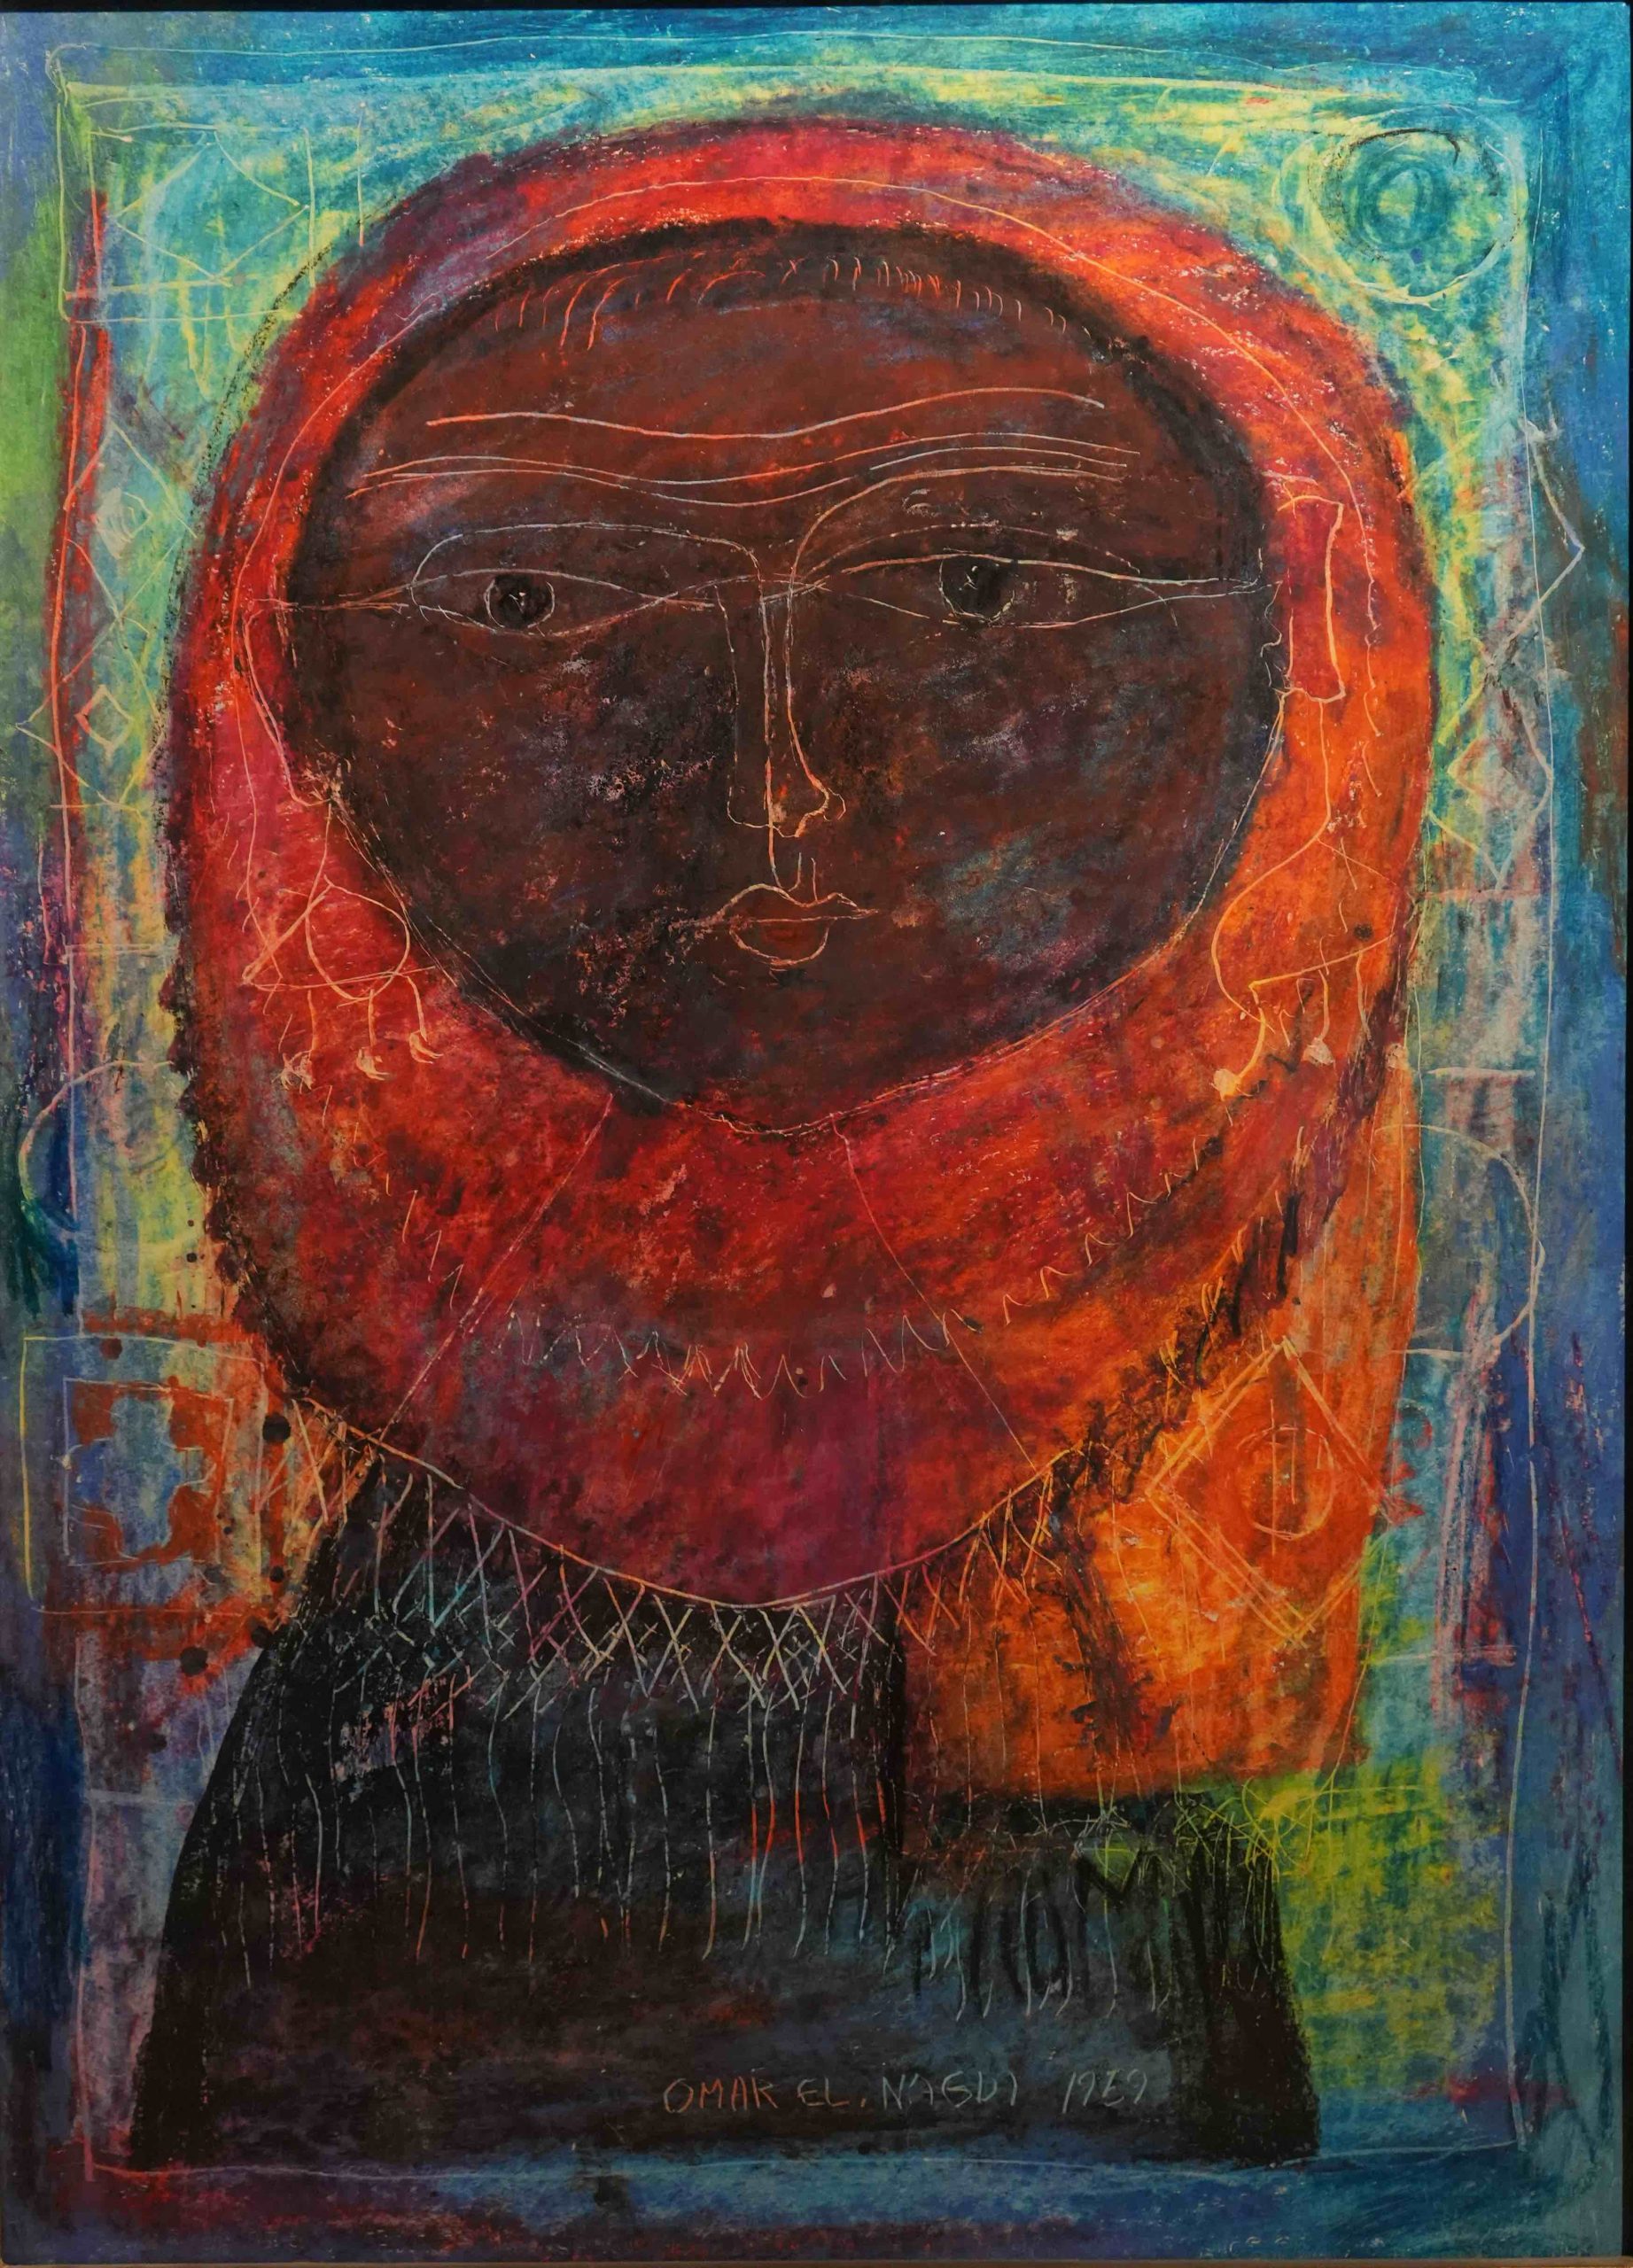 Omar El Nagdi Mixed media on paper 70 x 50 cm Signed and dated 1959